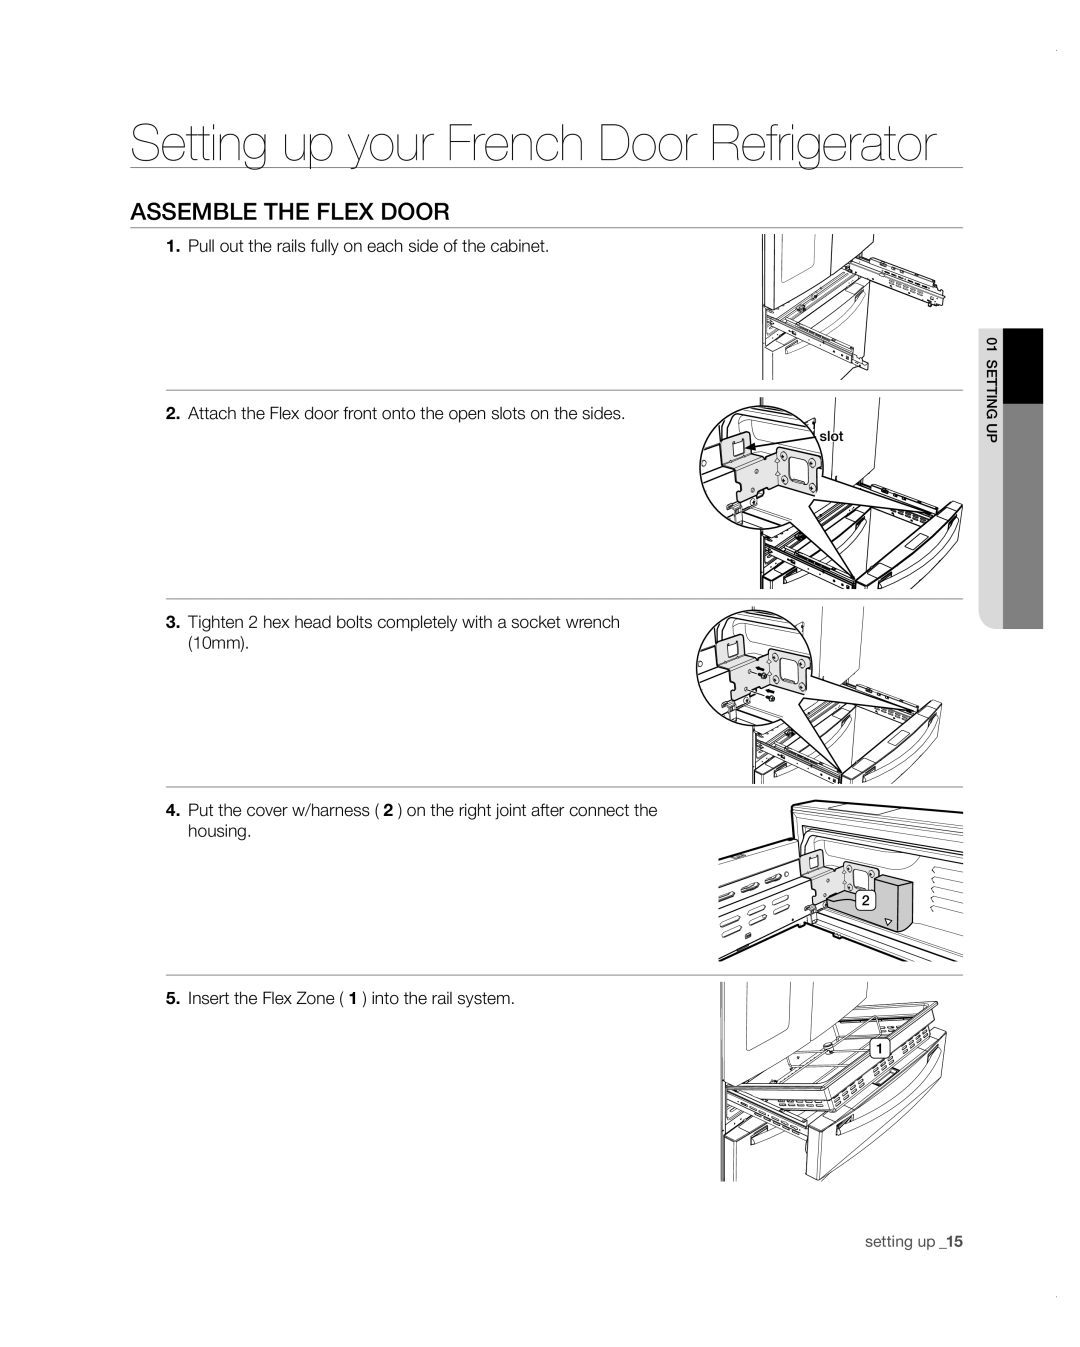 Samsung RF4287HARS user manual Assemble the Flex door, Setting up your French Door Refrigerator, setting up 